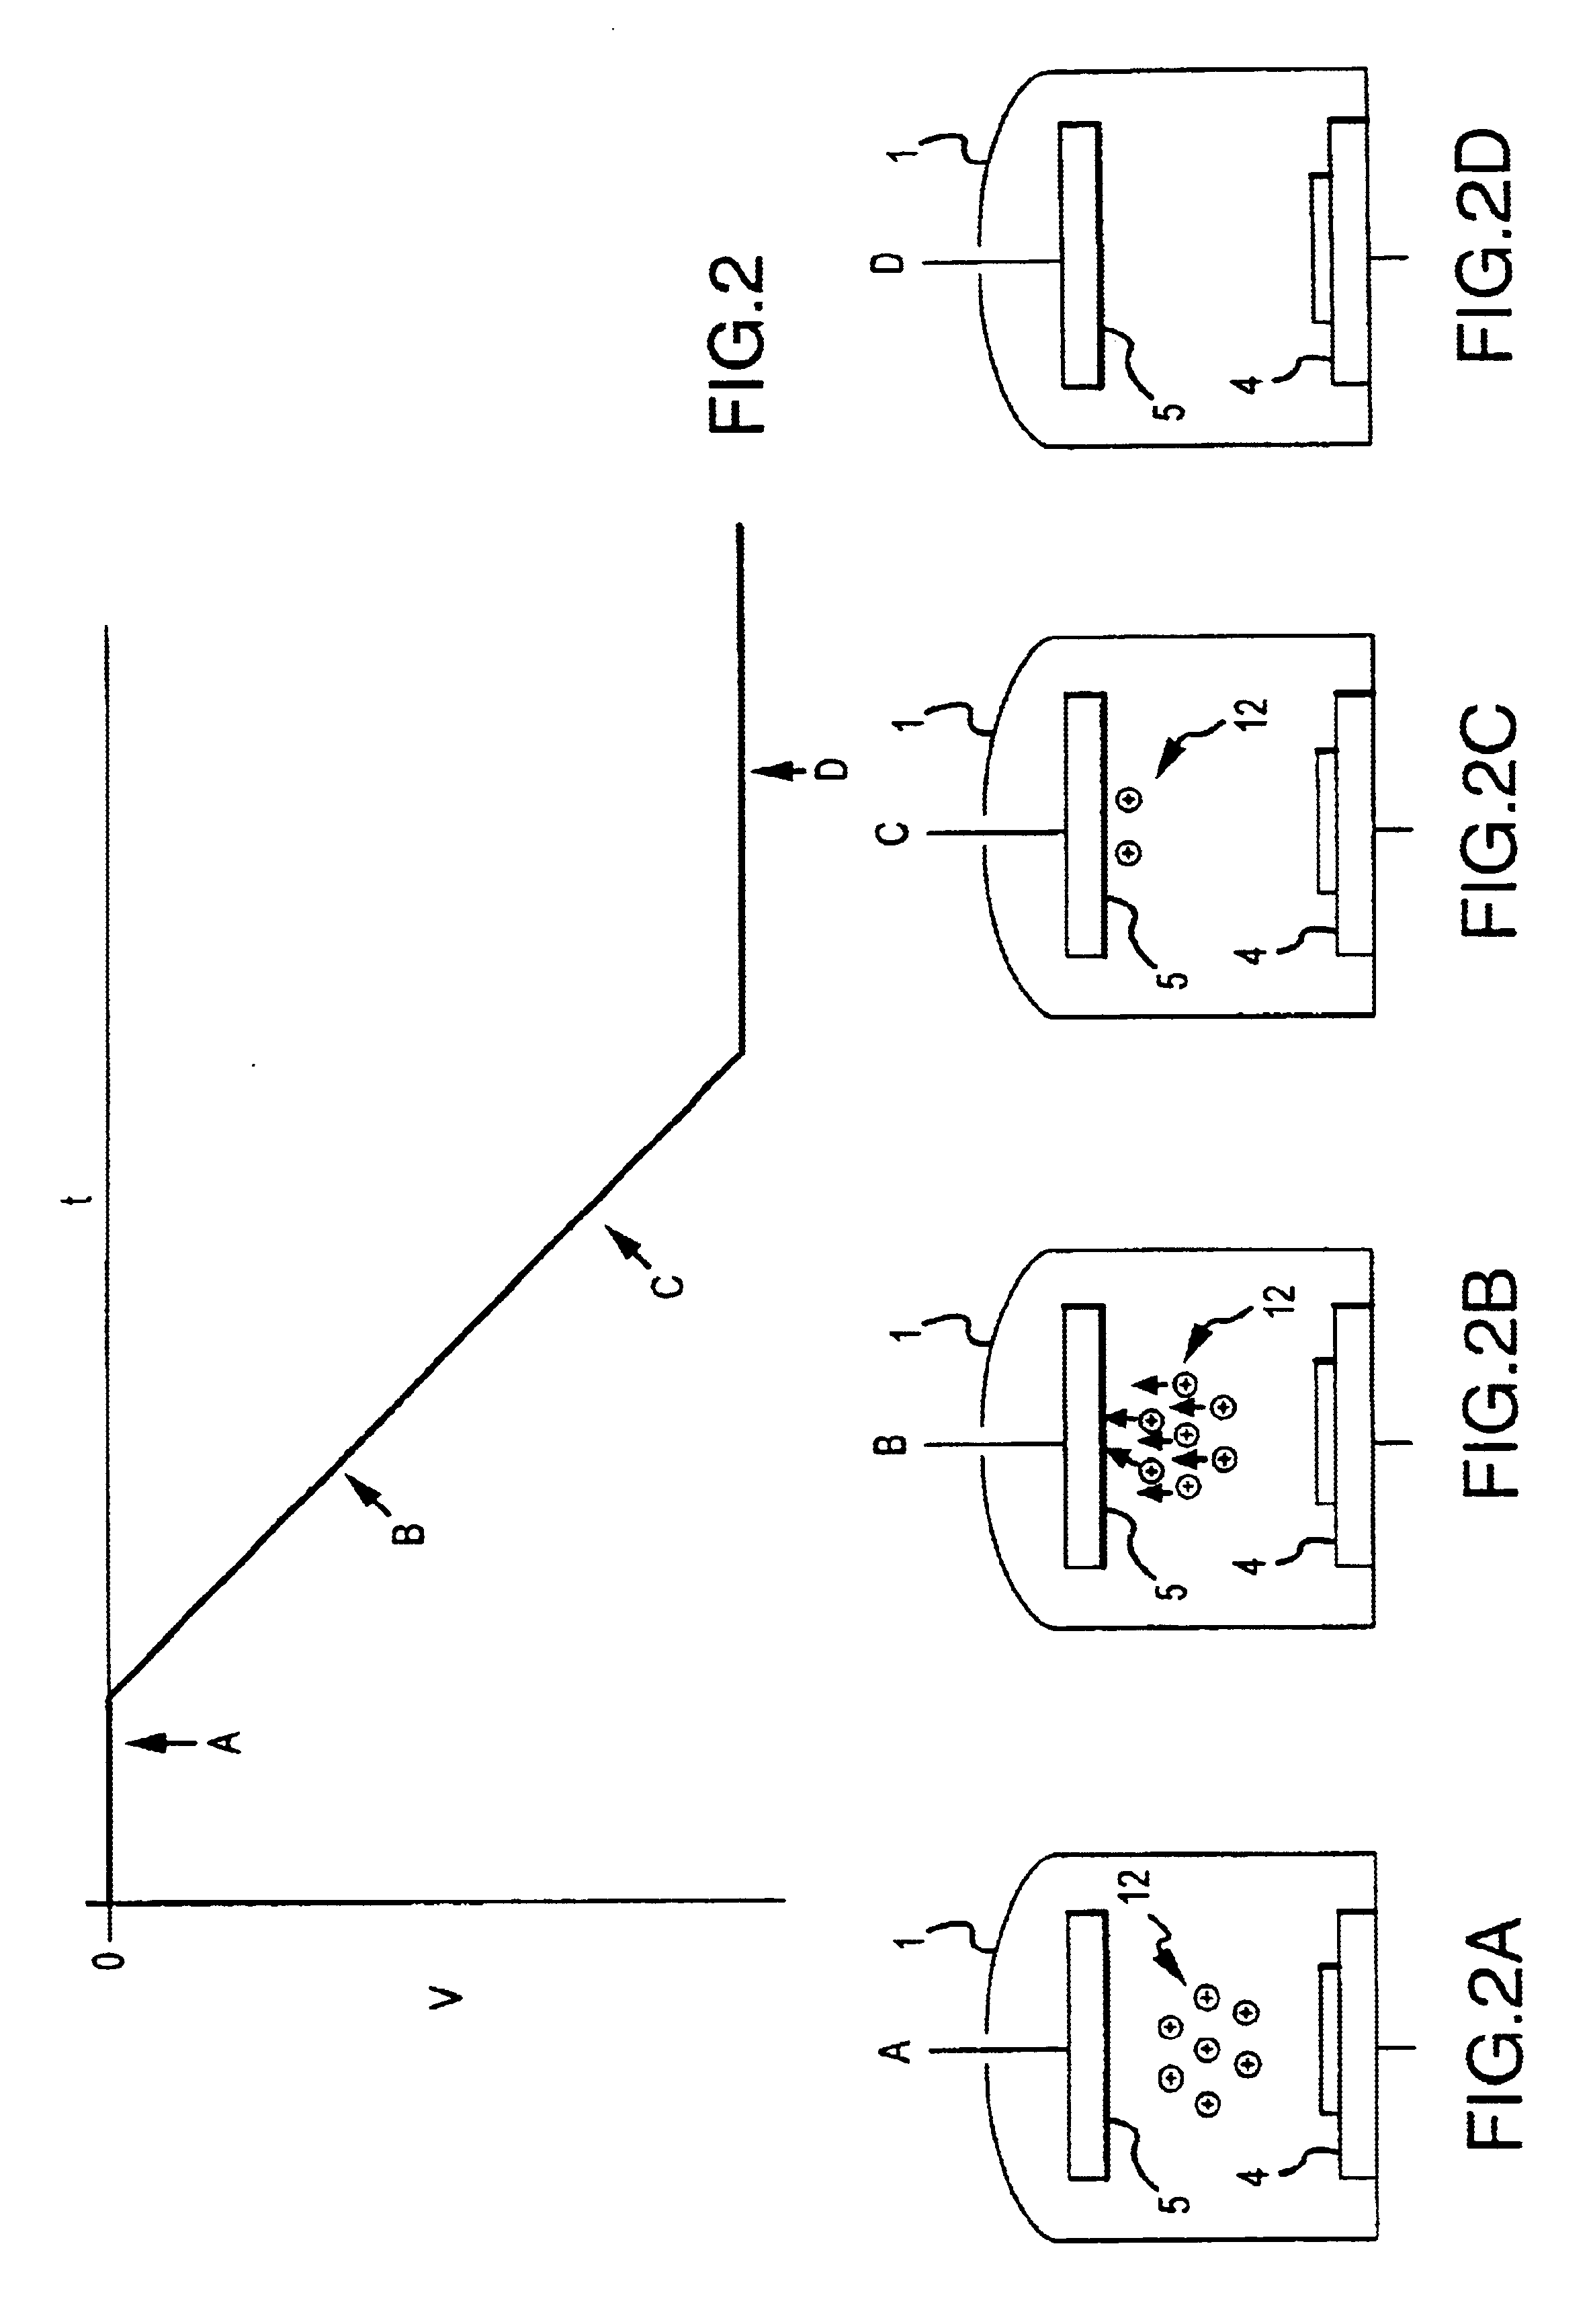 System for plasma ignition by fast voltage rise